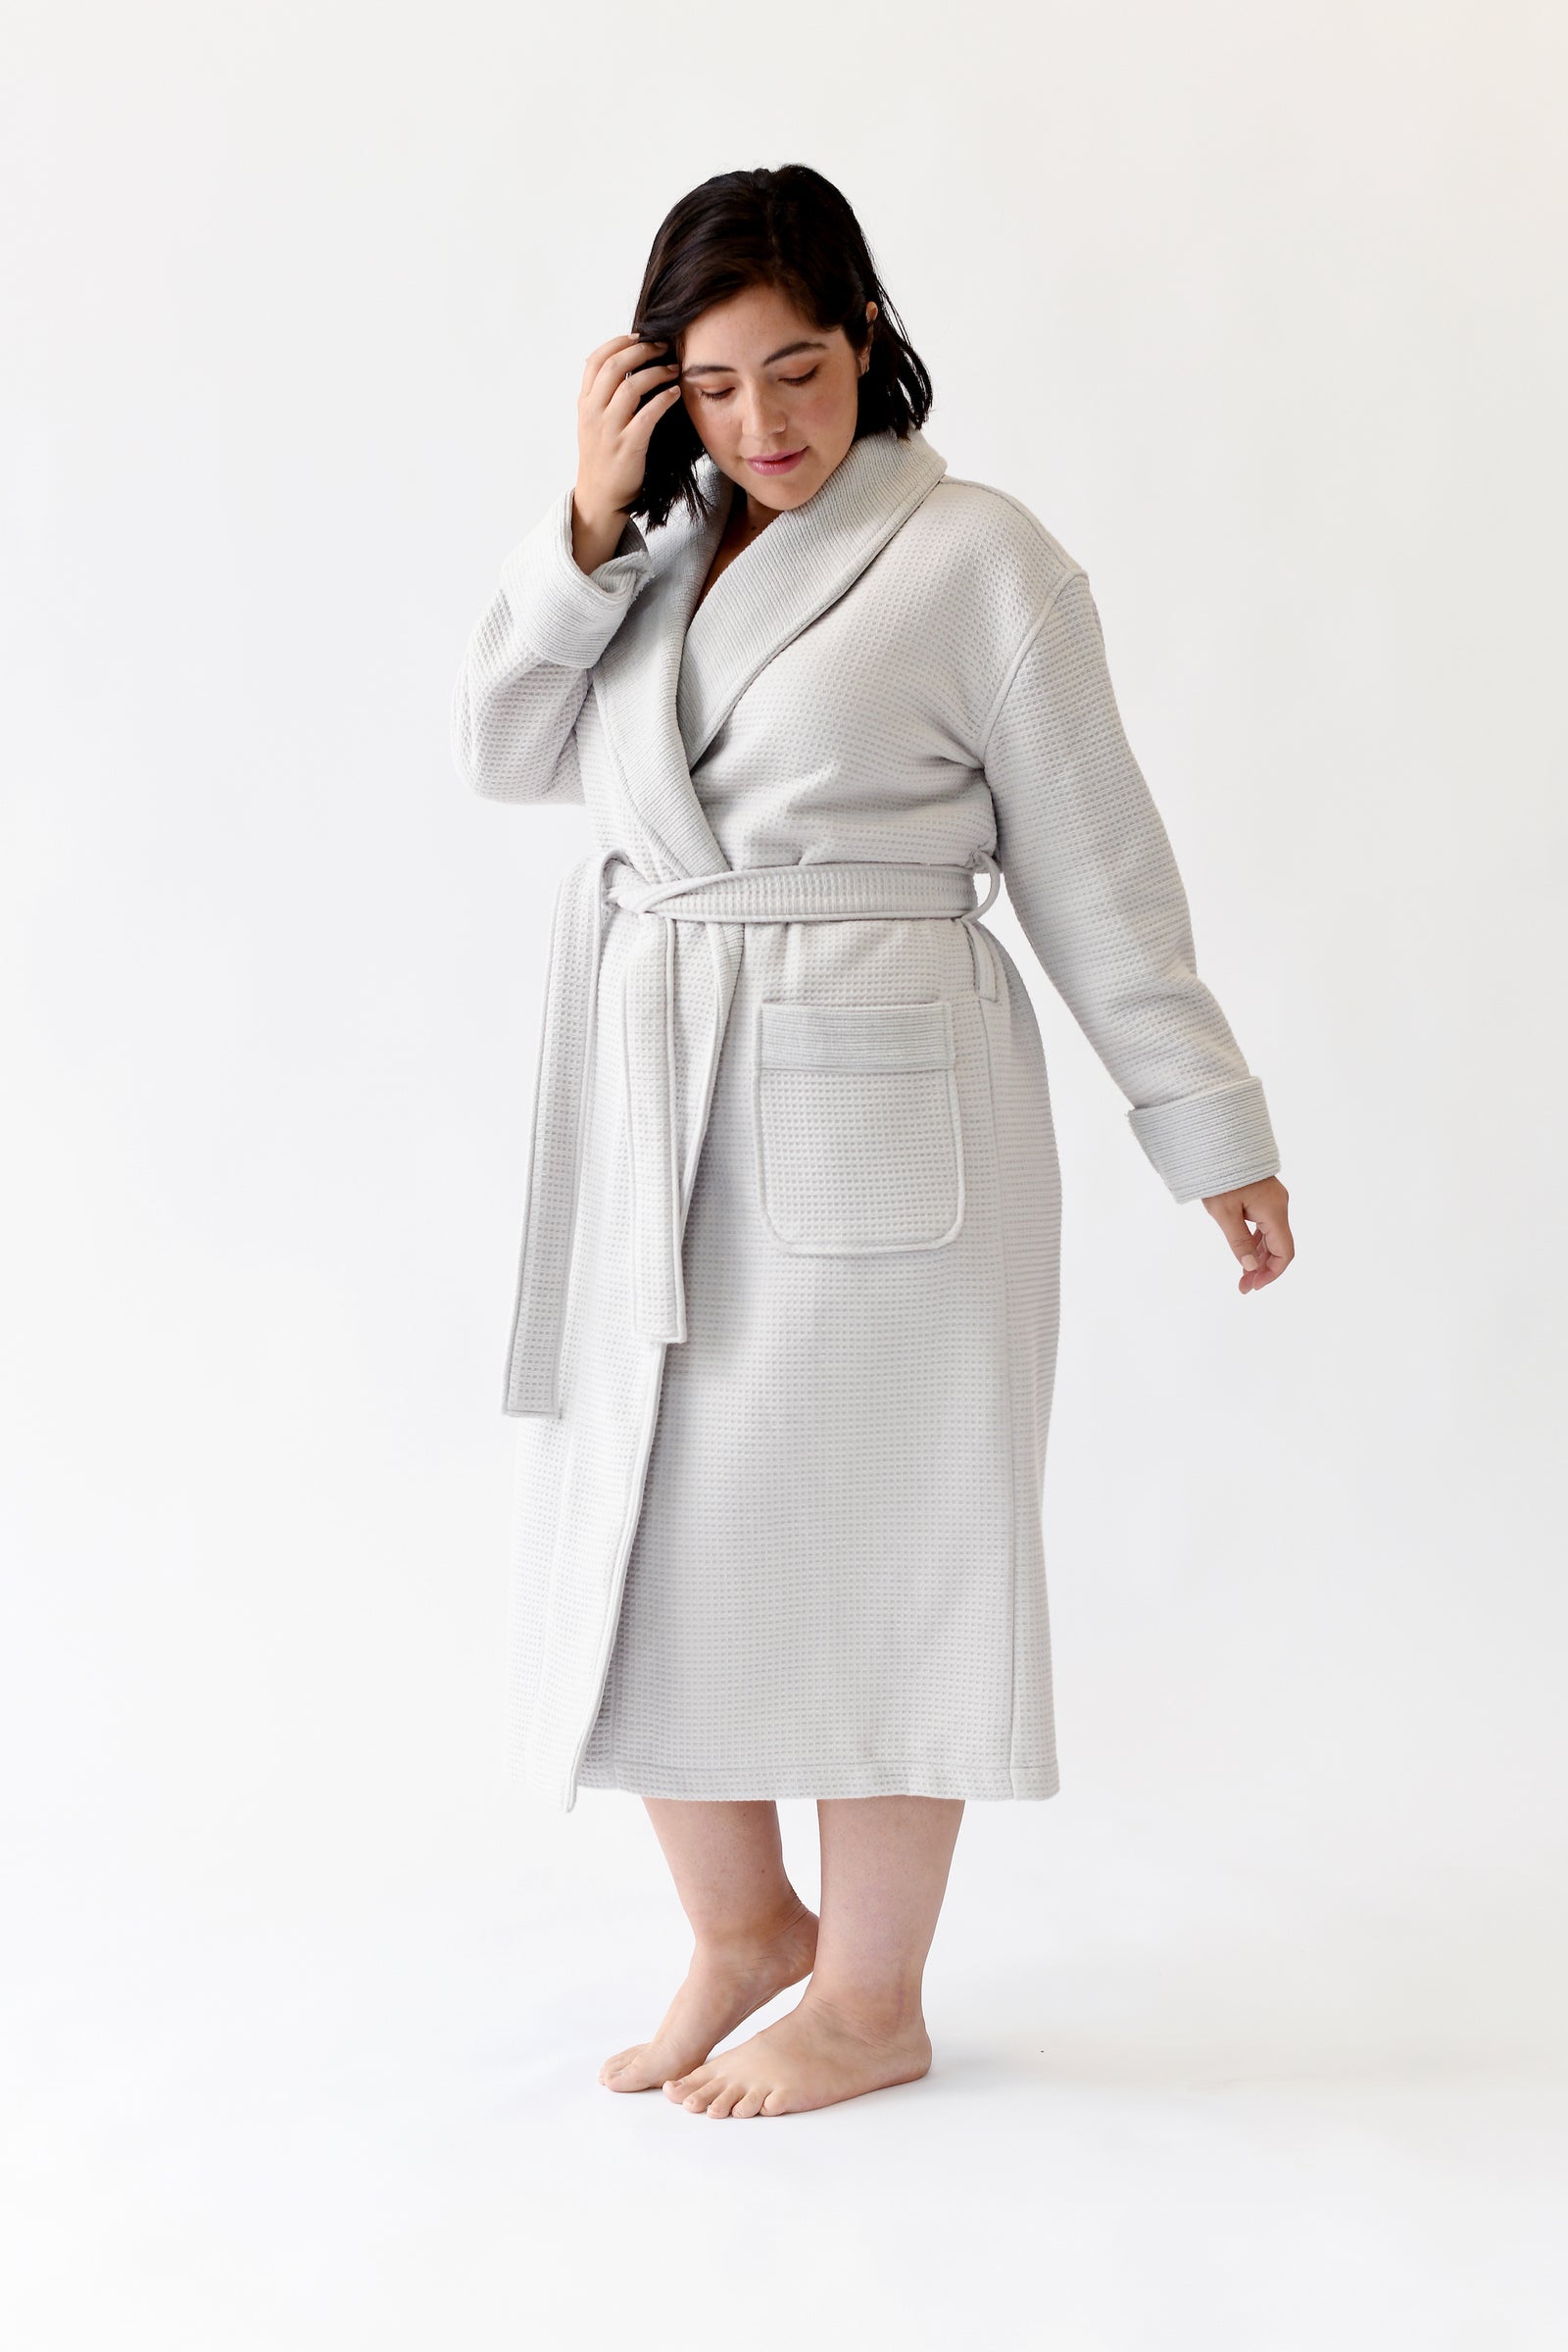 Woman wearing Bamboo Waffle Bath robe standing in front of a with a white background. 